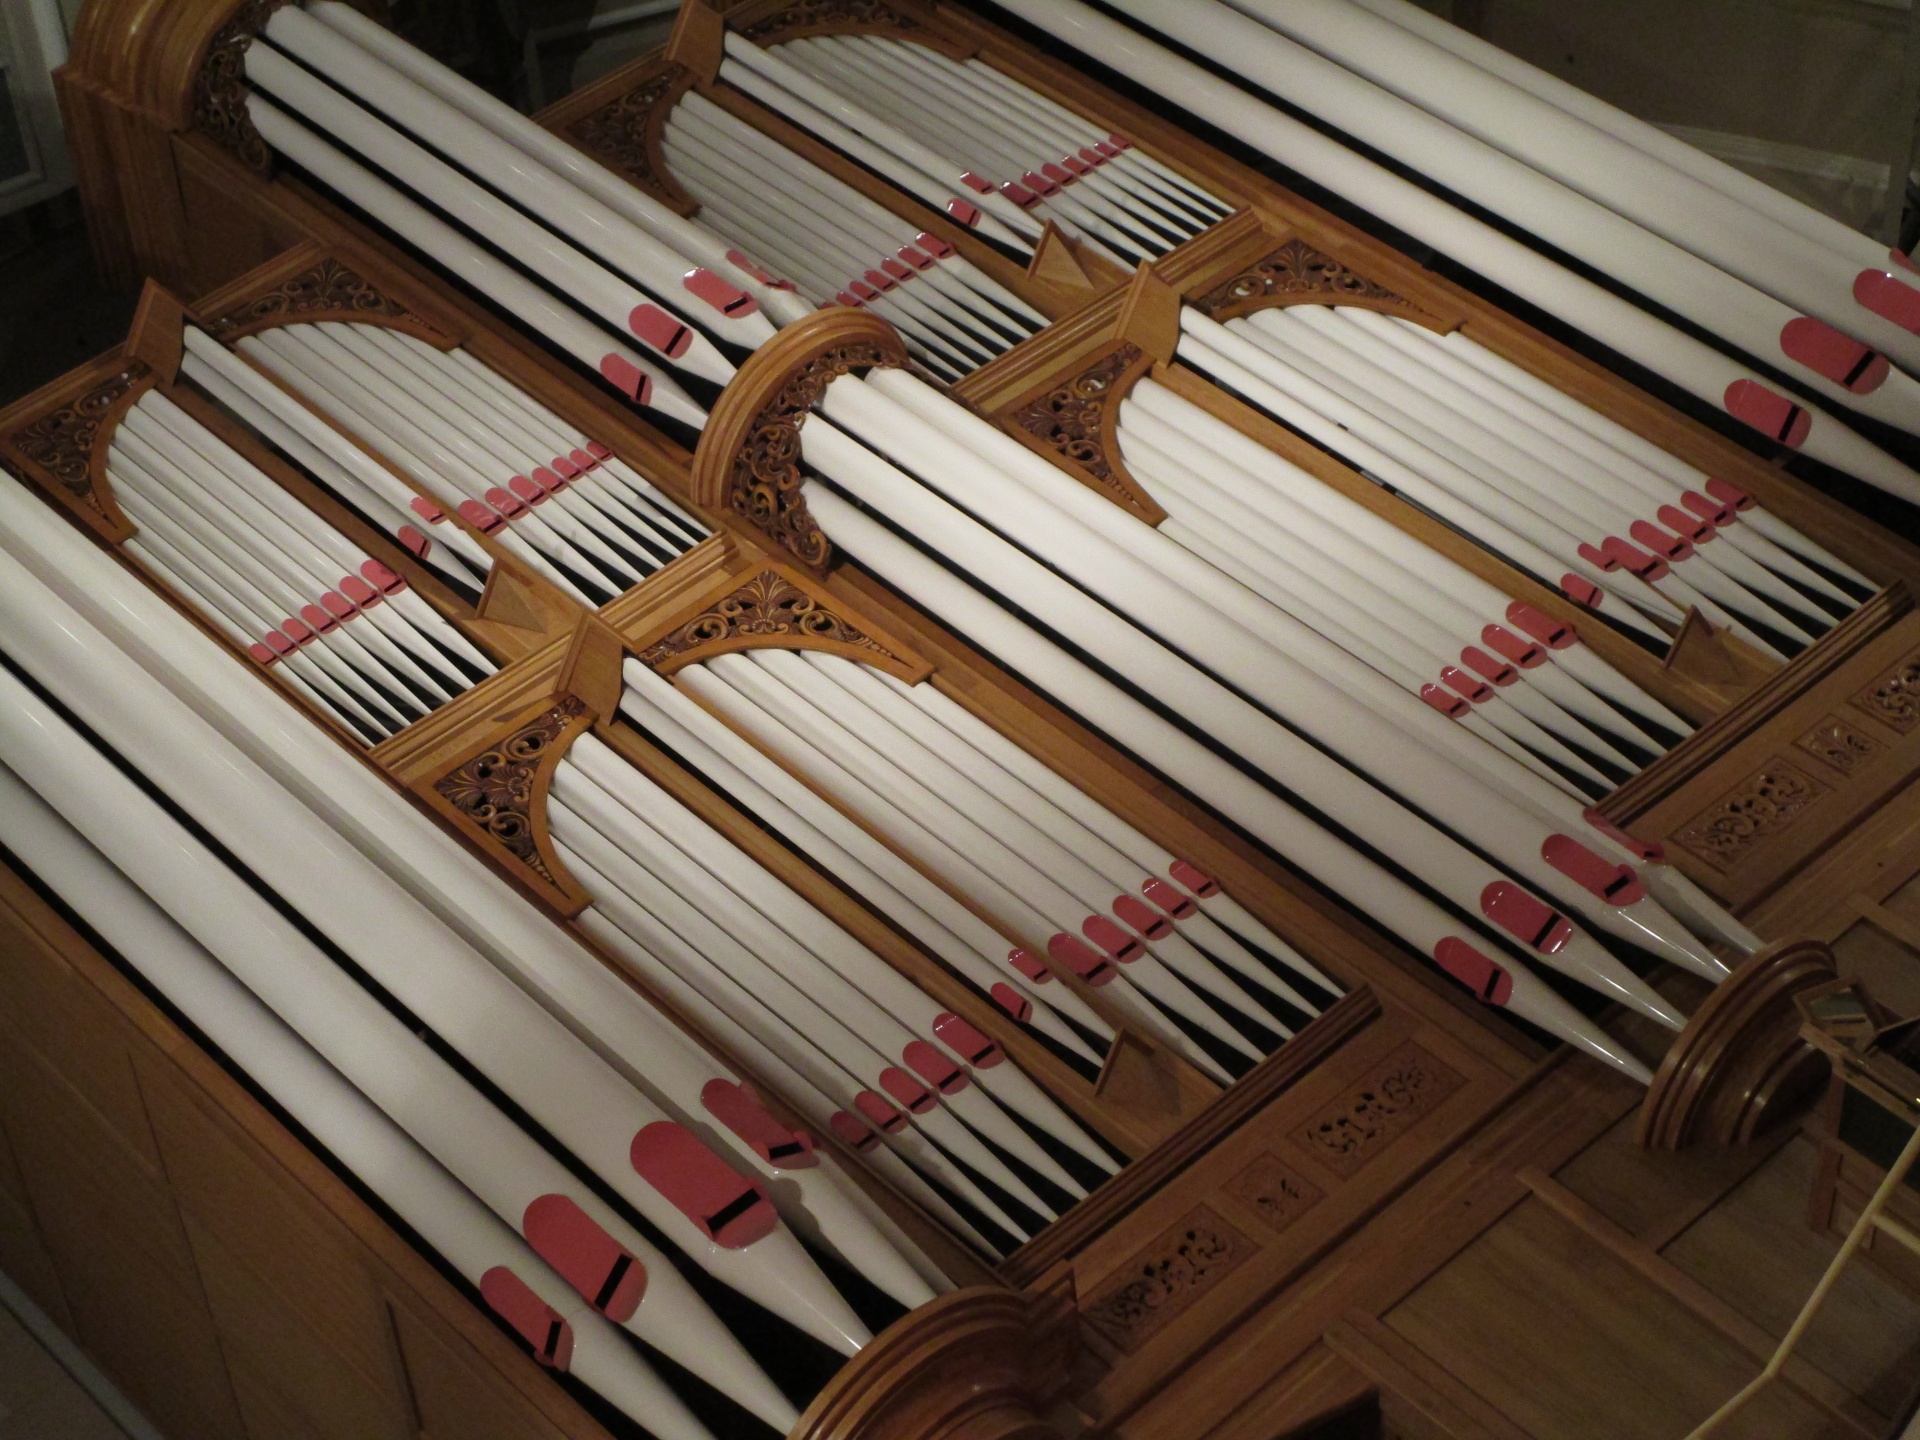 A photo at an angle of the pipe organ in the Feather Market Centre, Port Elizabeth, South Africa.